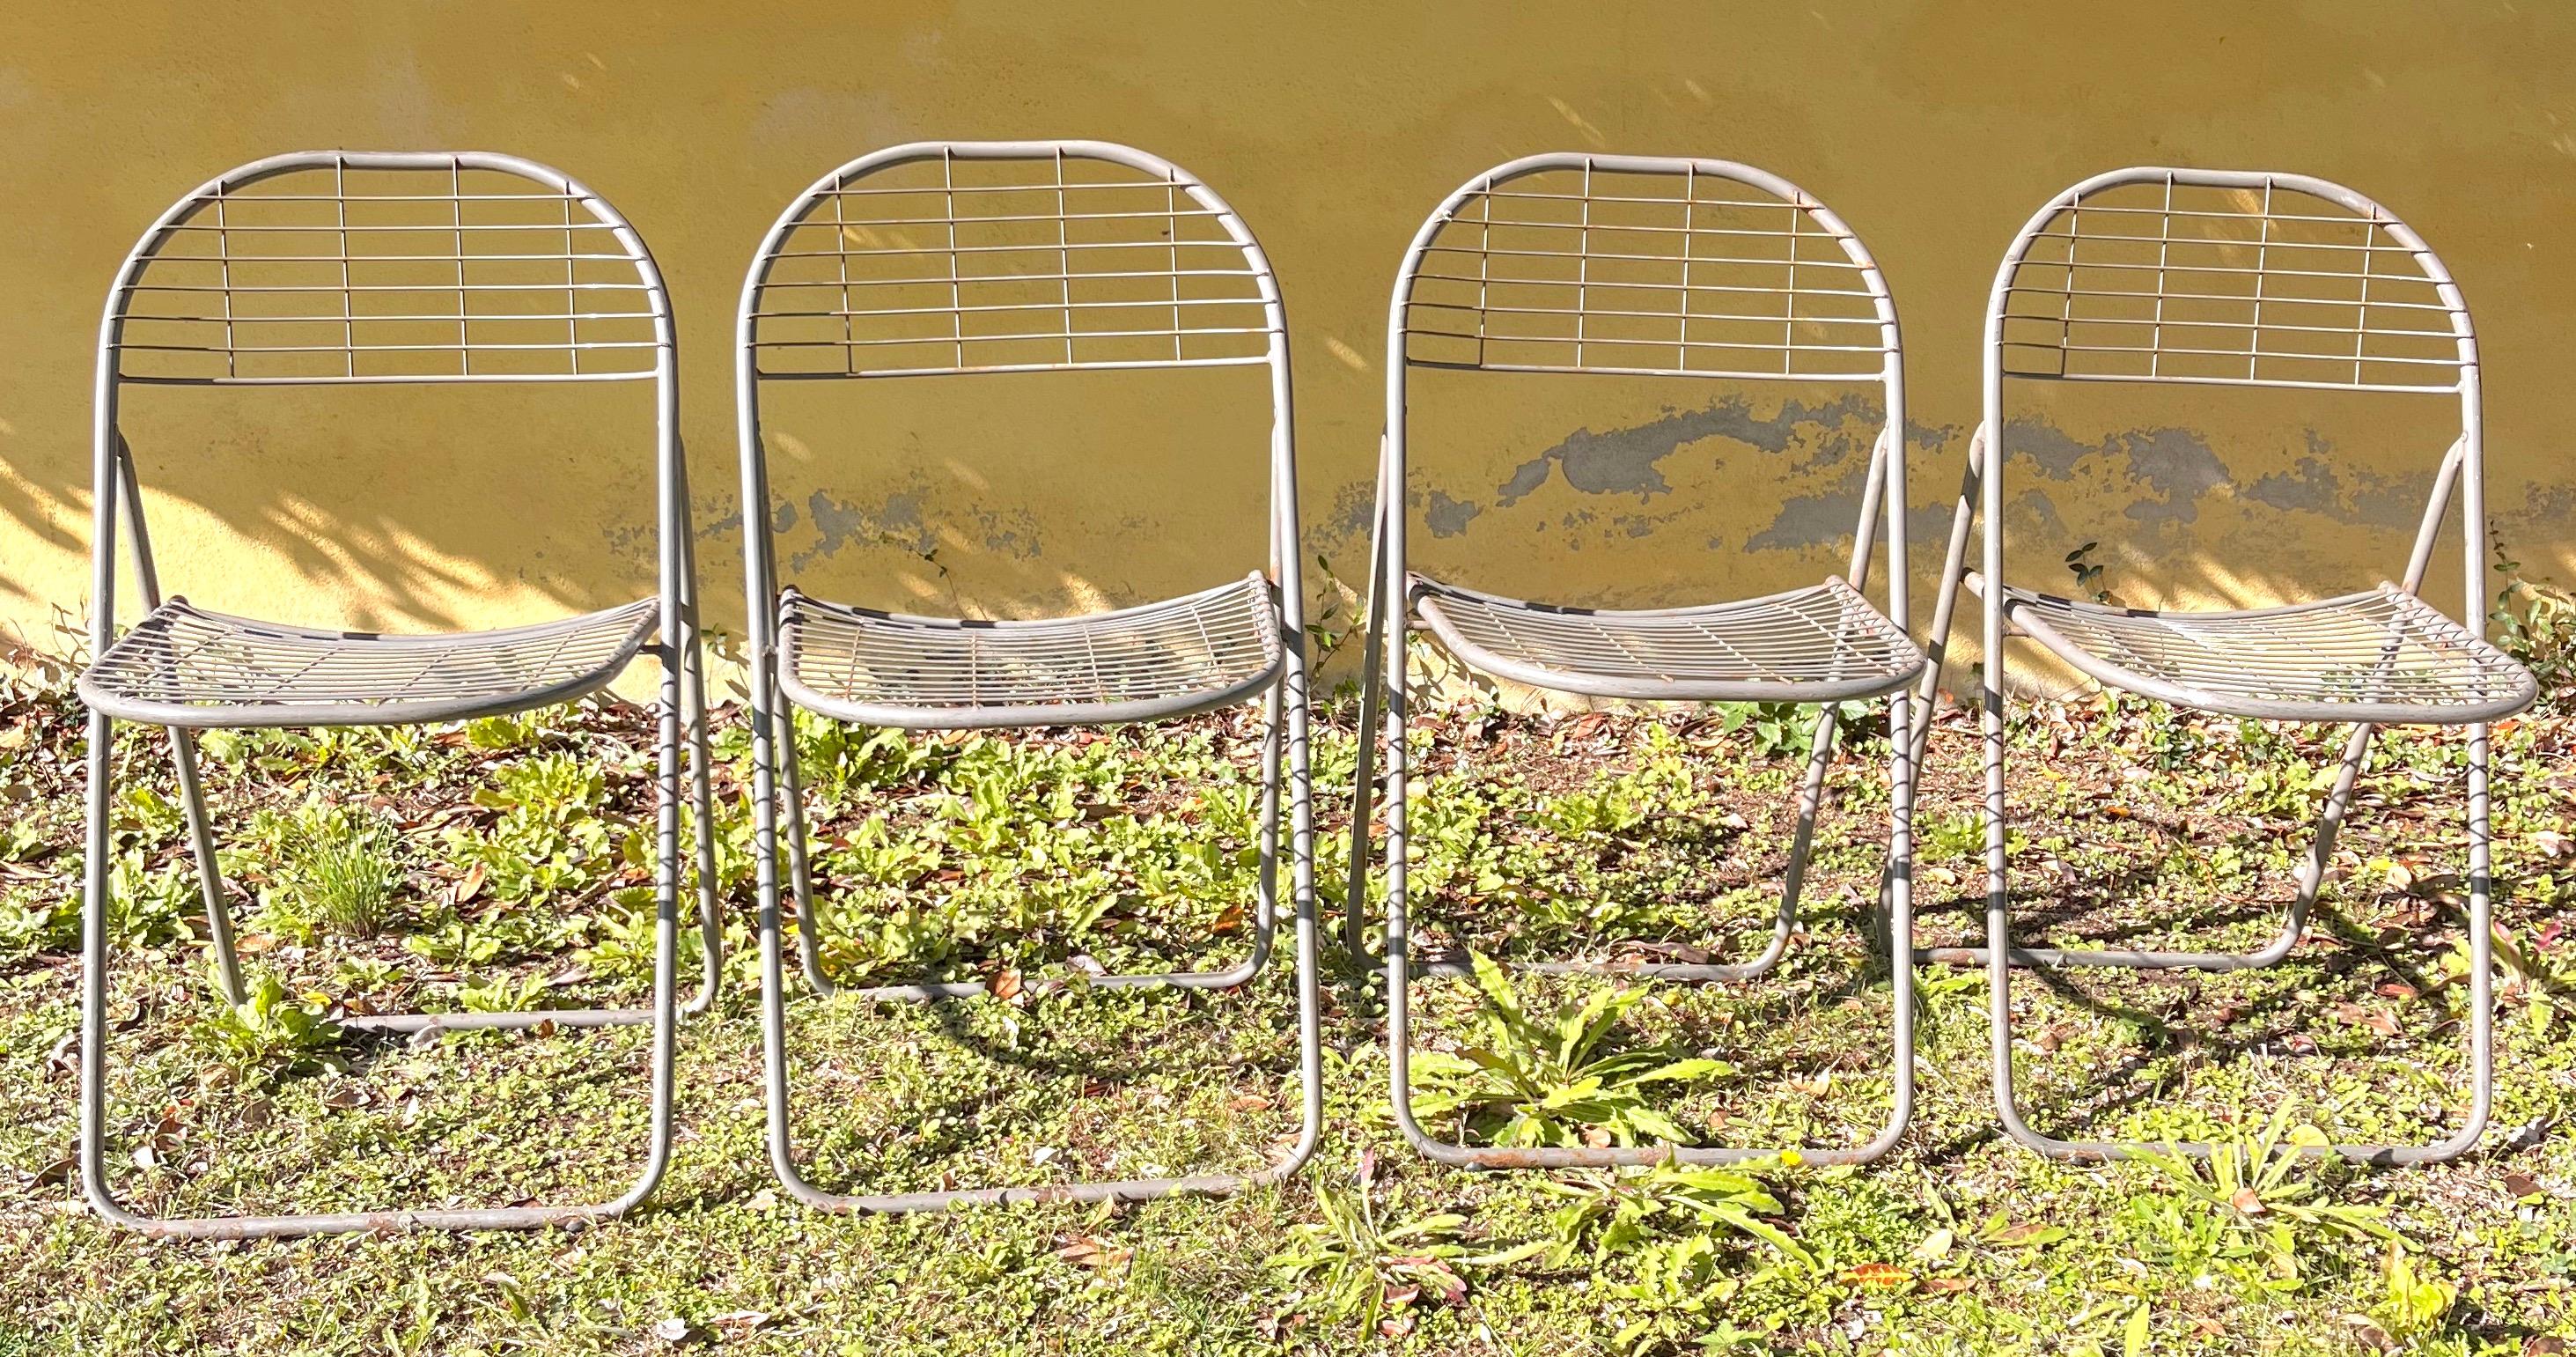 Ted Net folding chairs by Niels Gammelgaard for Ikea, 1970. Timeless design. Foldable and easy to store. Made of gray enameled iron. Good condition, show usual signs of wear and time.
In good condition no repairs  Chair height 80 cm seat width 42 cm